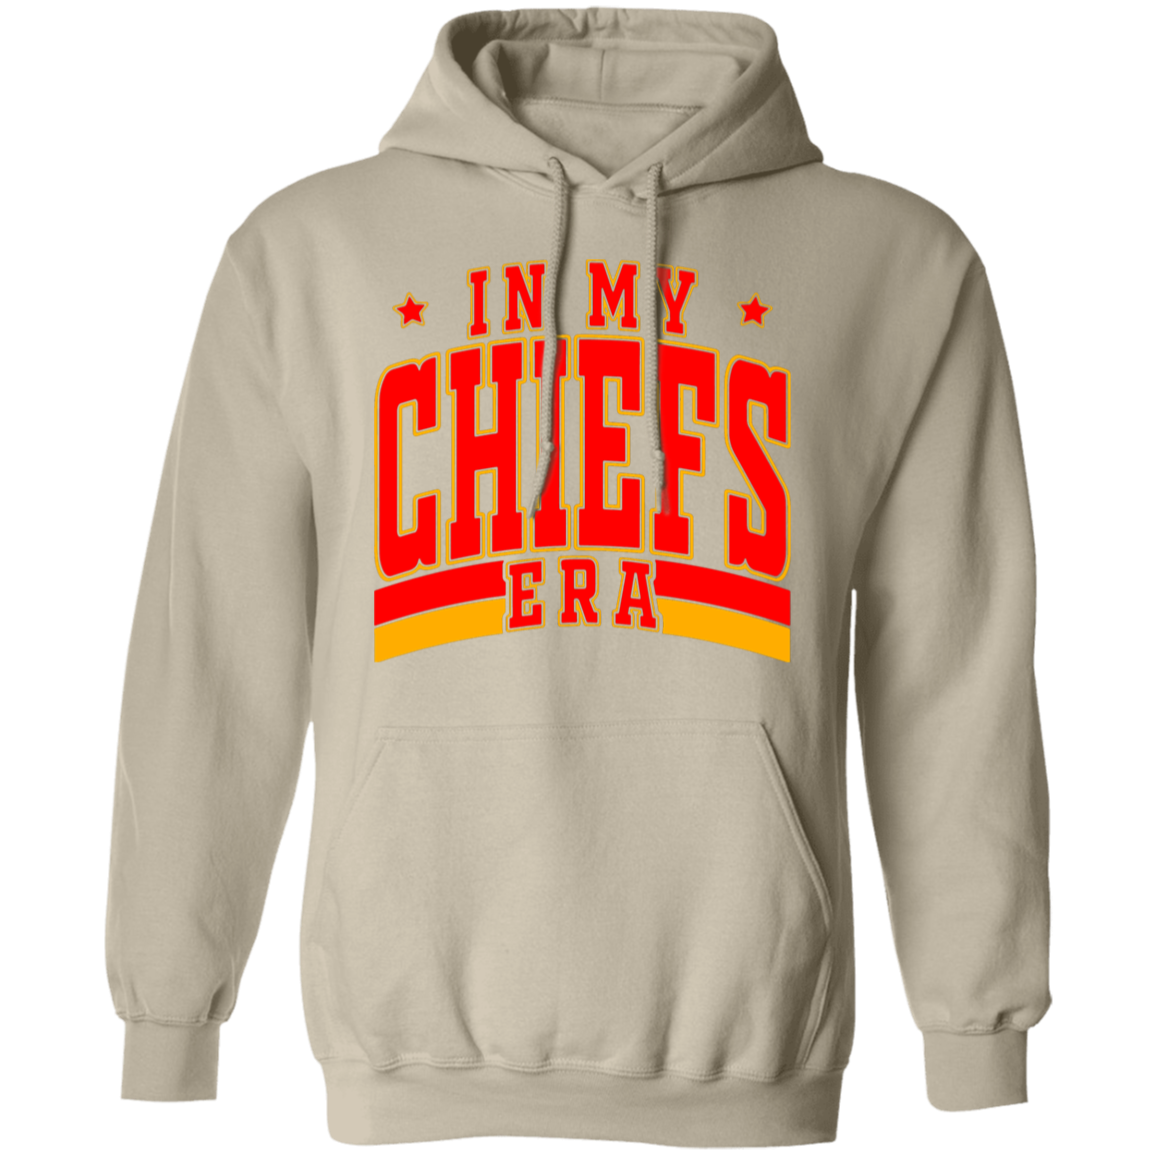 In My Chiefs Era - Game Day Clothing